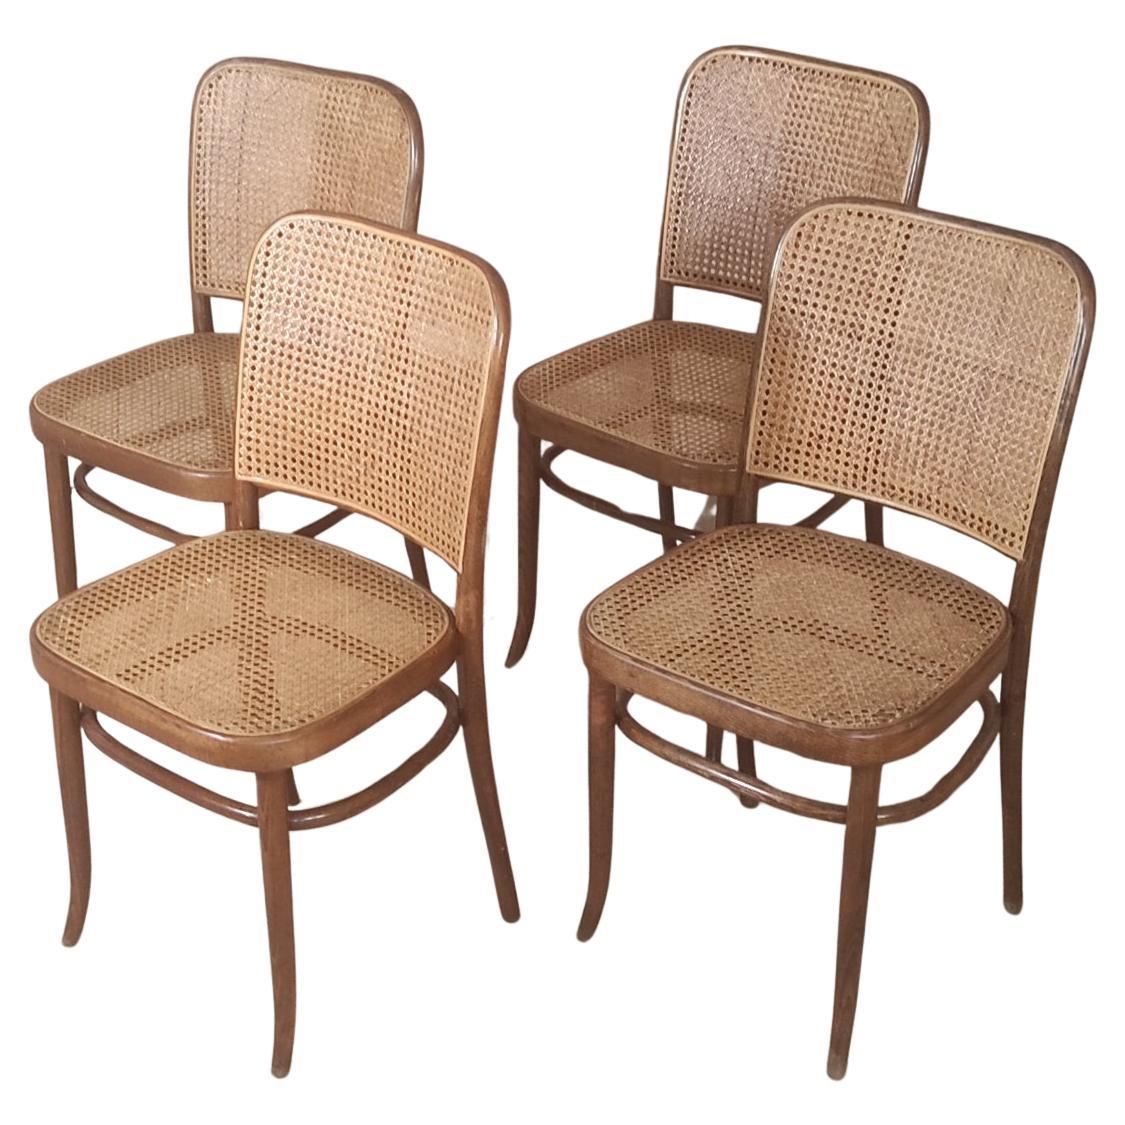 Set of Four Vintage Prague 811 Chair By Josef Hoffmann 1950s For Sale